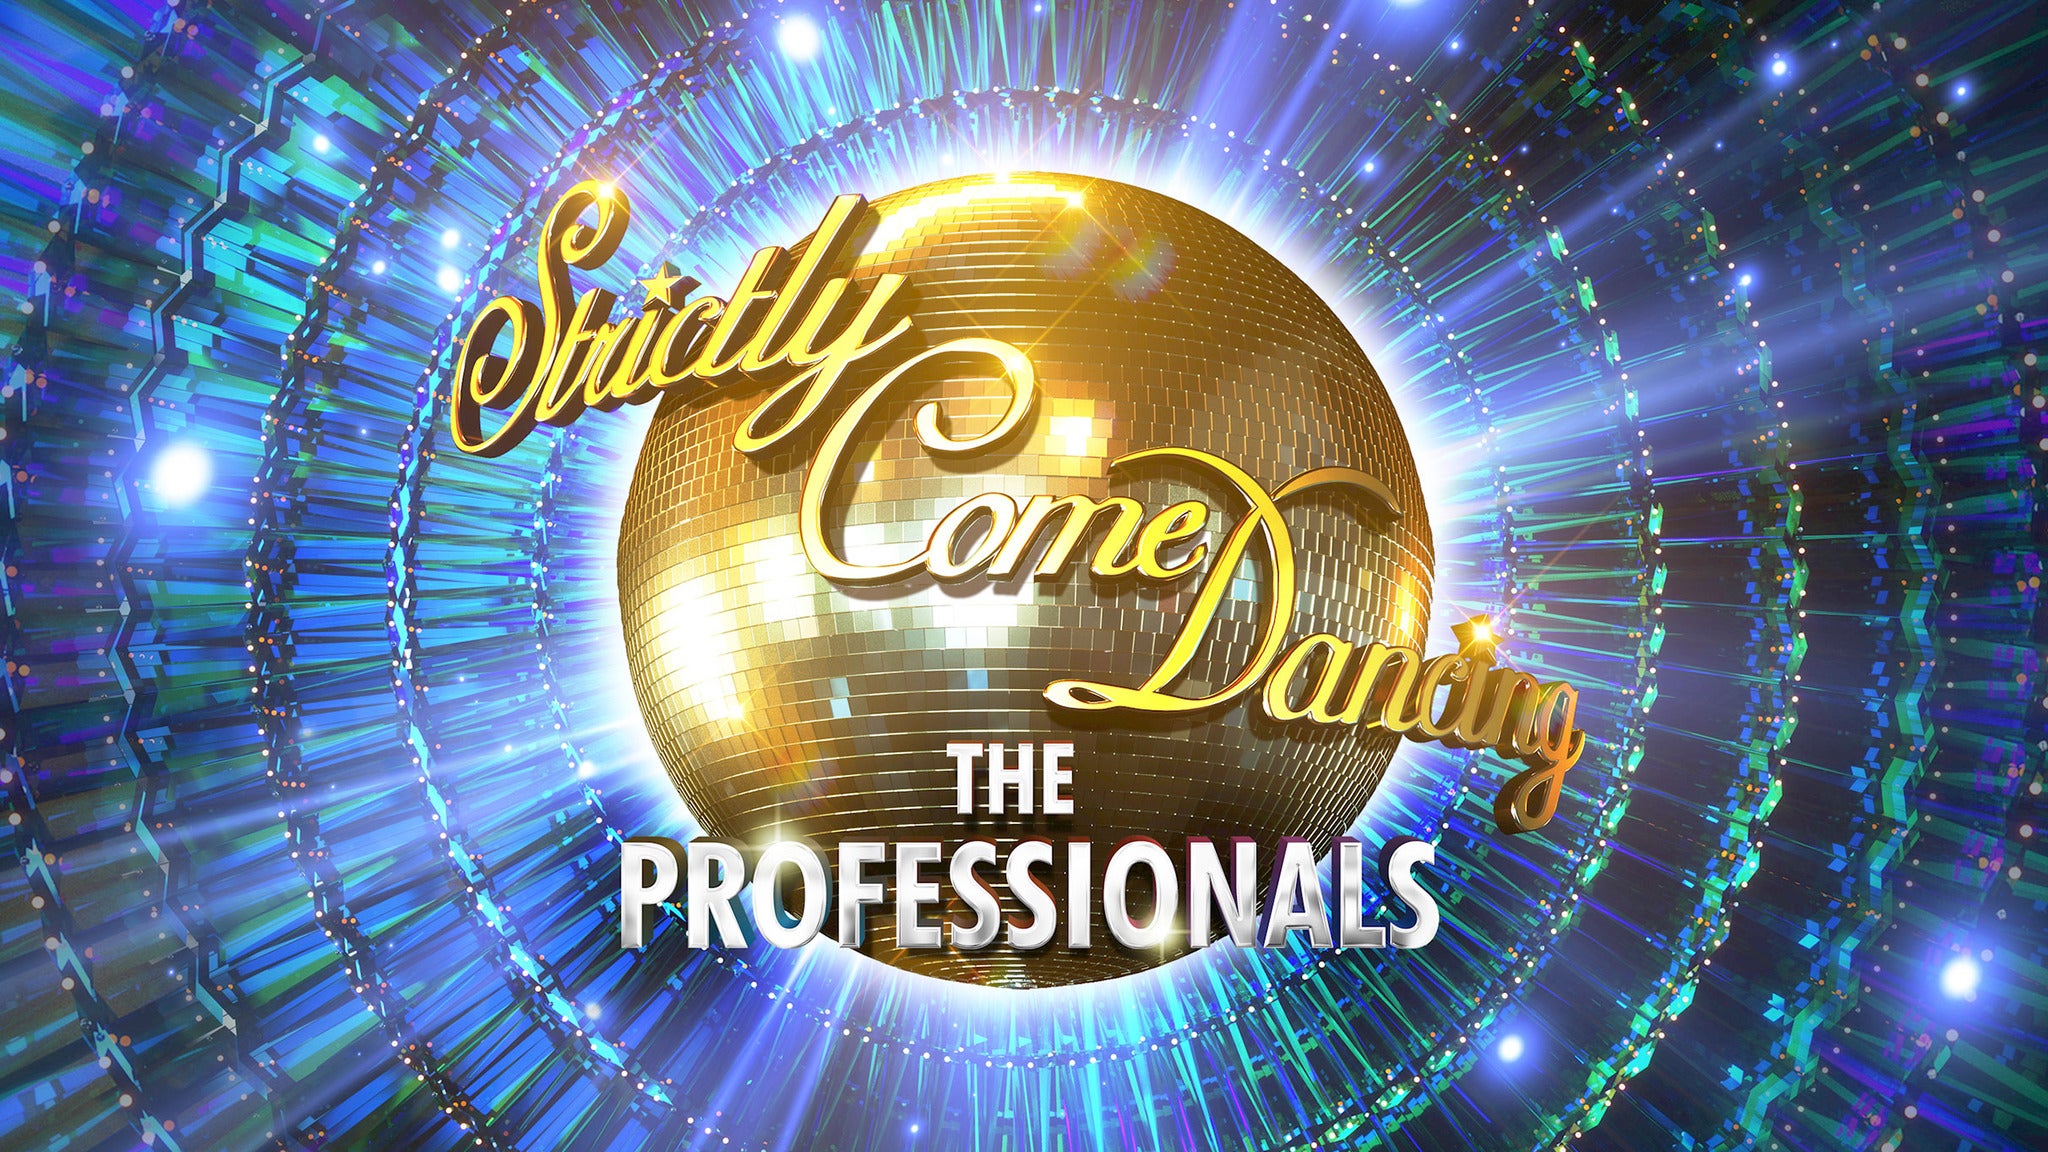 Strictly Come Dancing The Professionals Tour 2022 Event Title Pic